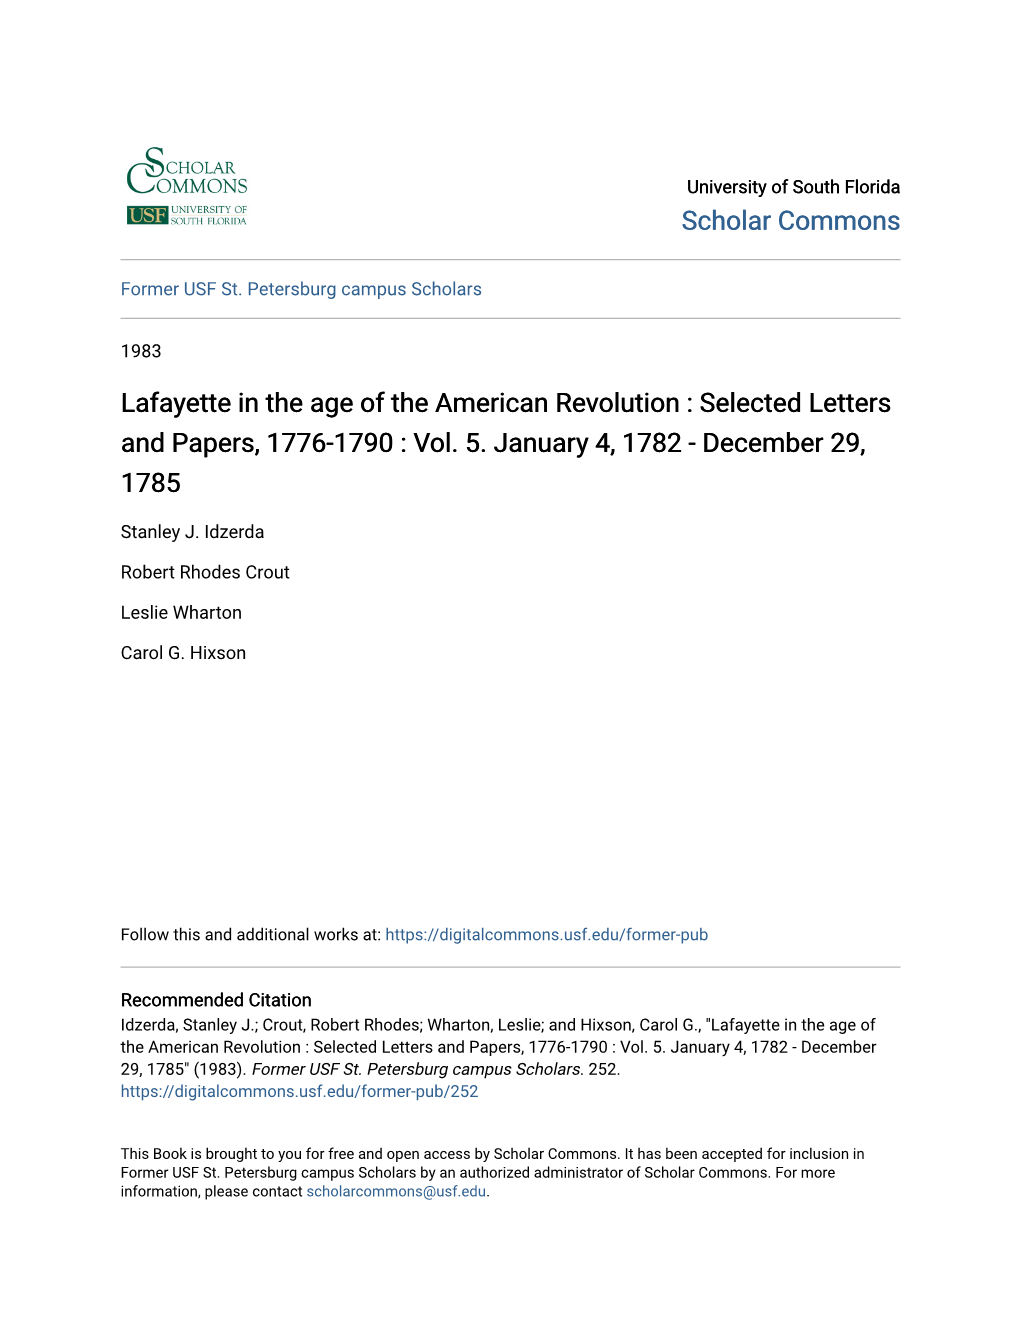 Lafayette in the Age of the American Revolution : Selected Letters and Papers, 1776-1790 : Vol